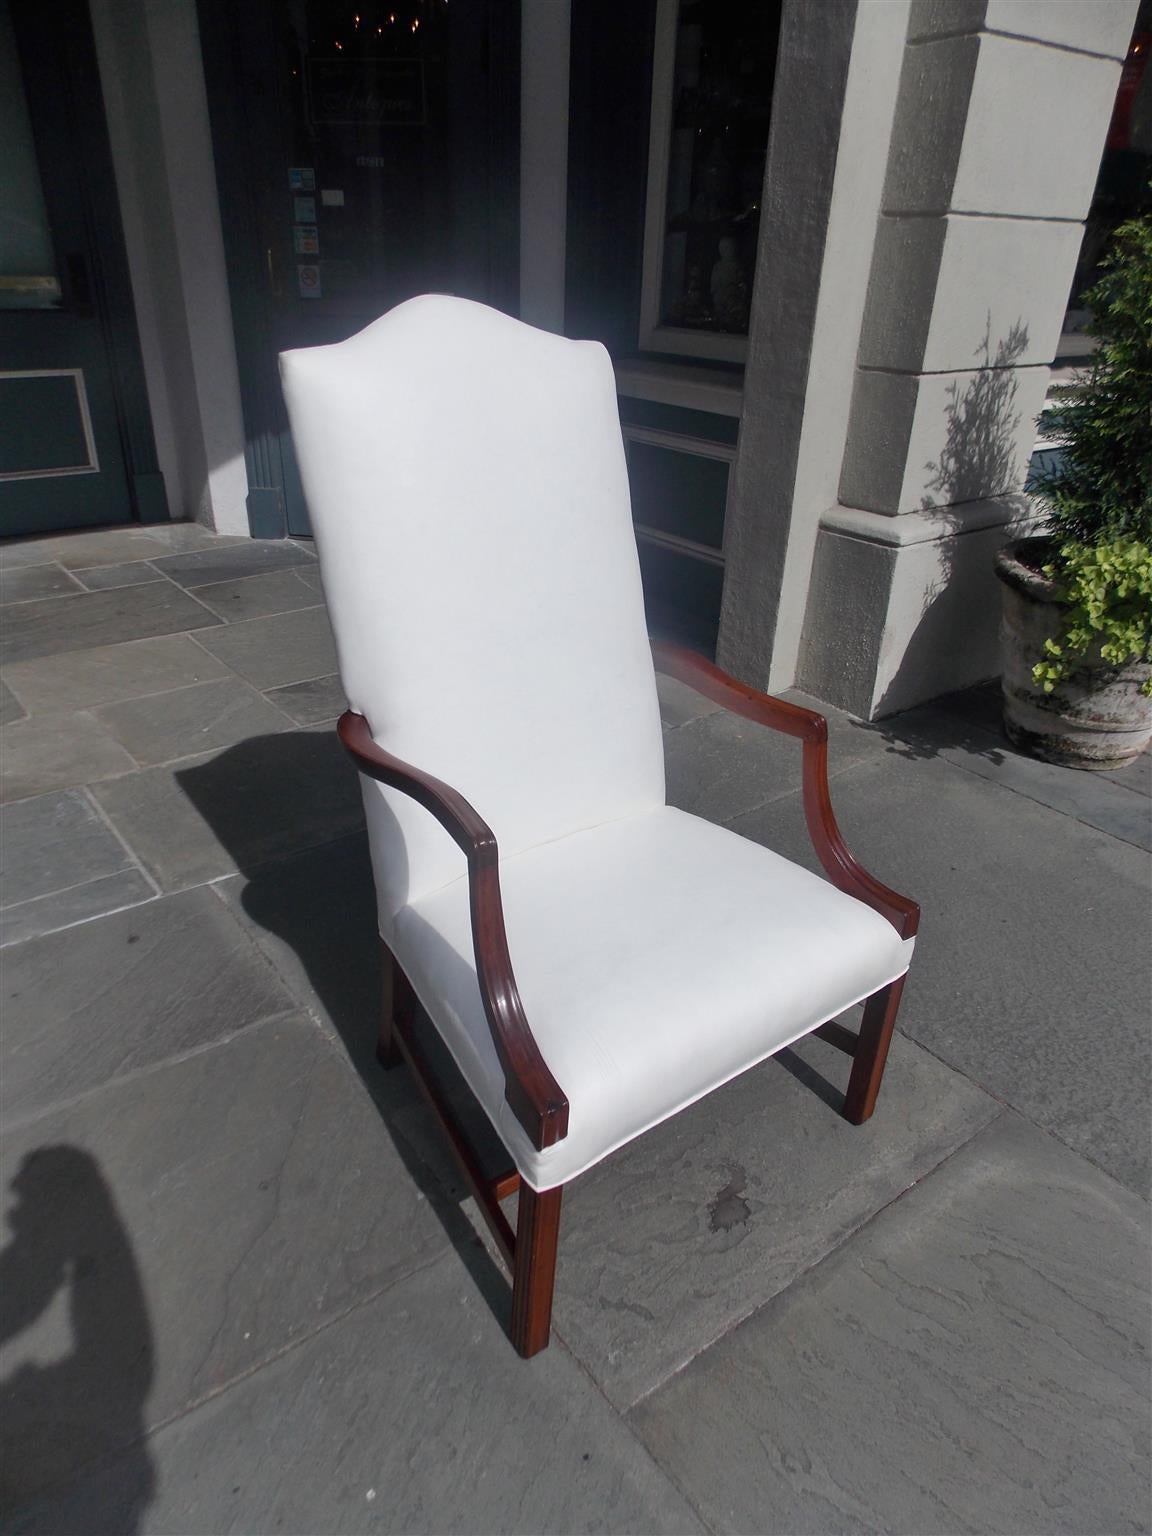 American mahogany Martha Washington armchair with serpentine slant high back, reeded scrolled and squared arms, terminating on reeded squared curvature legs with connecting stretchers. Chair is upholstered in white muslin with original horse hair